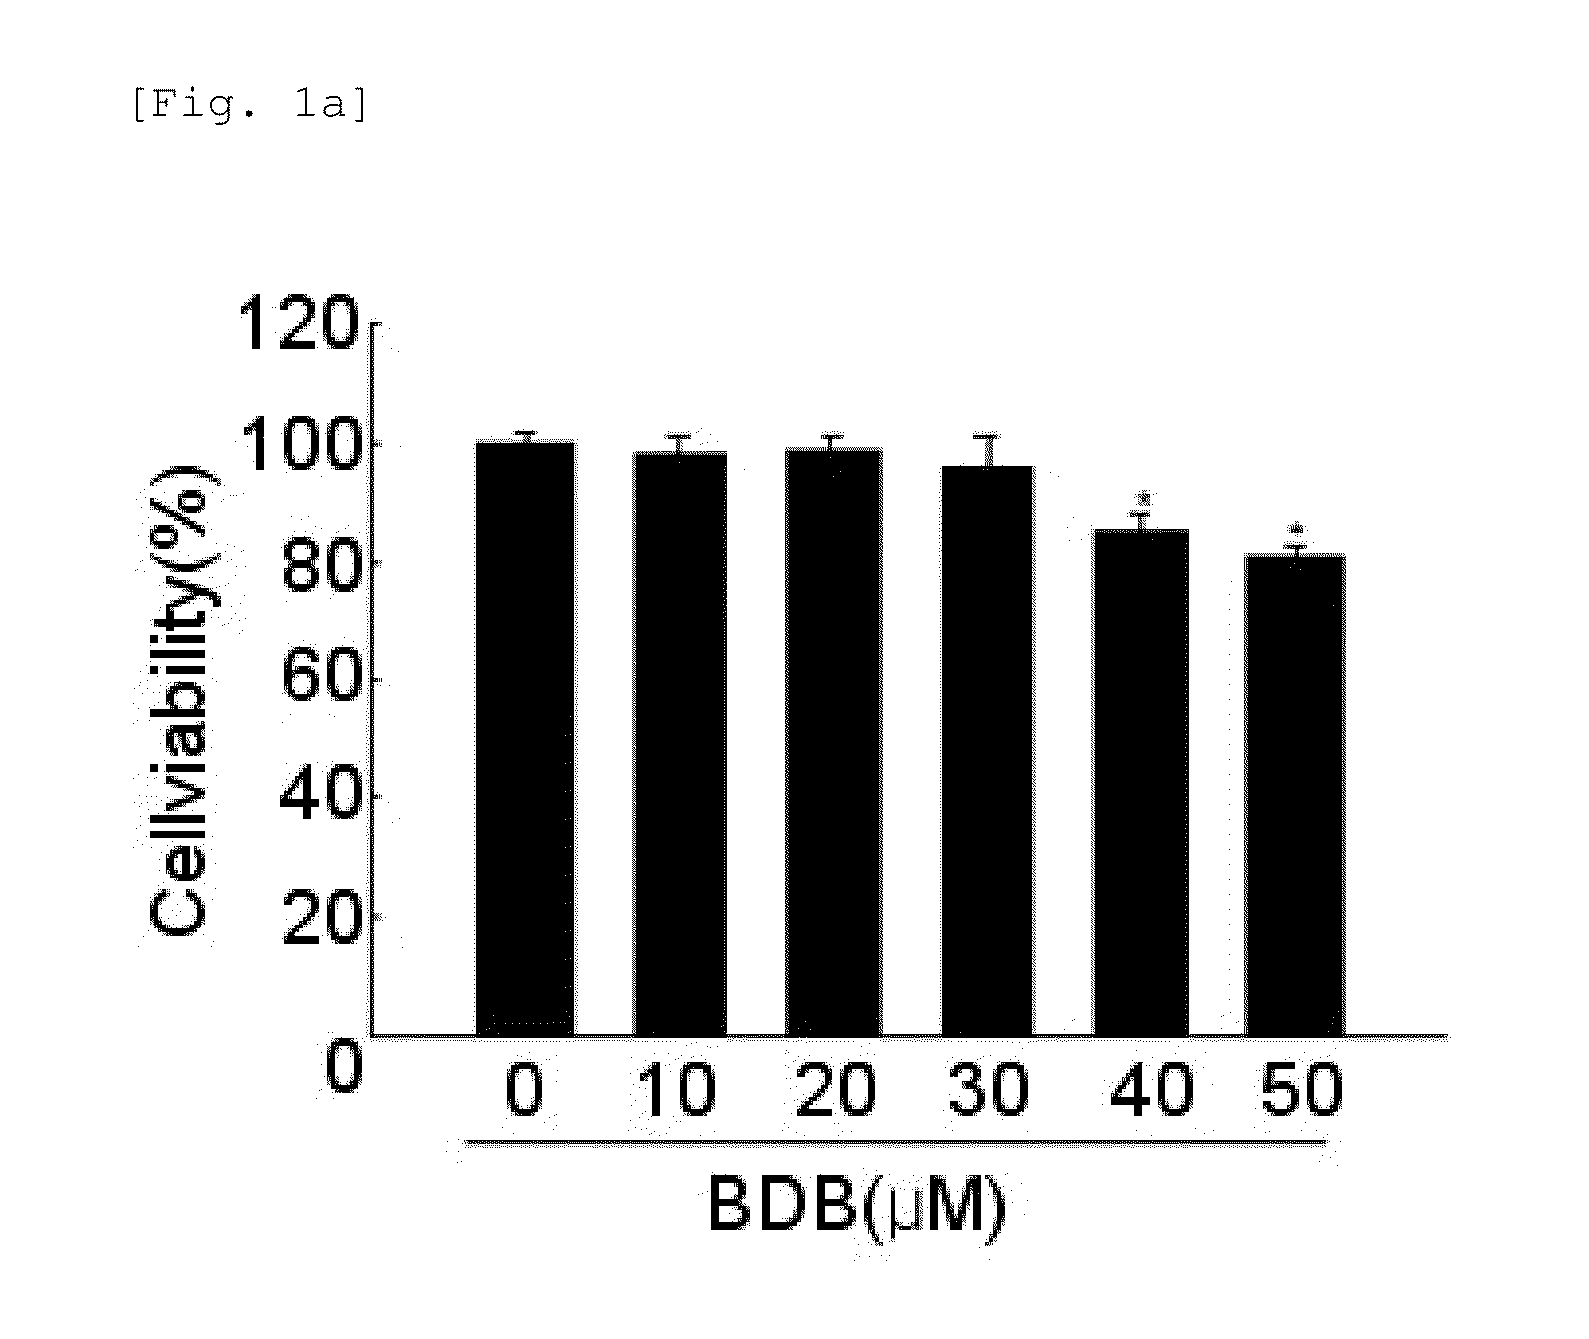 Composition including 3-bromo-4,5-dihydroxybenzaldehyde compound as effective component for protecting and treating skin cell aganist ultraviolet